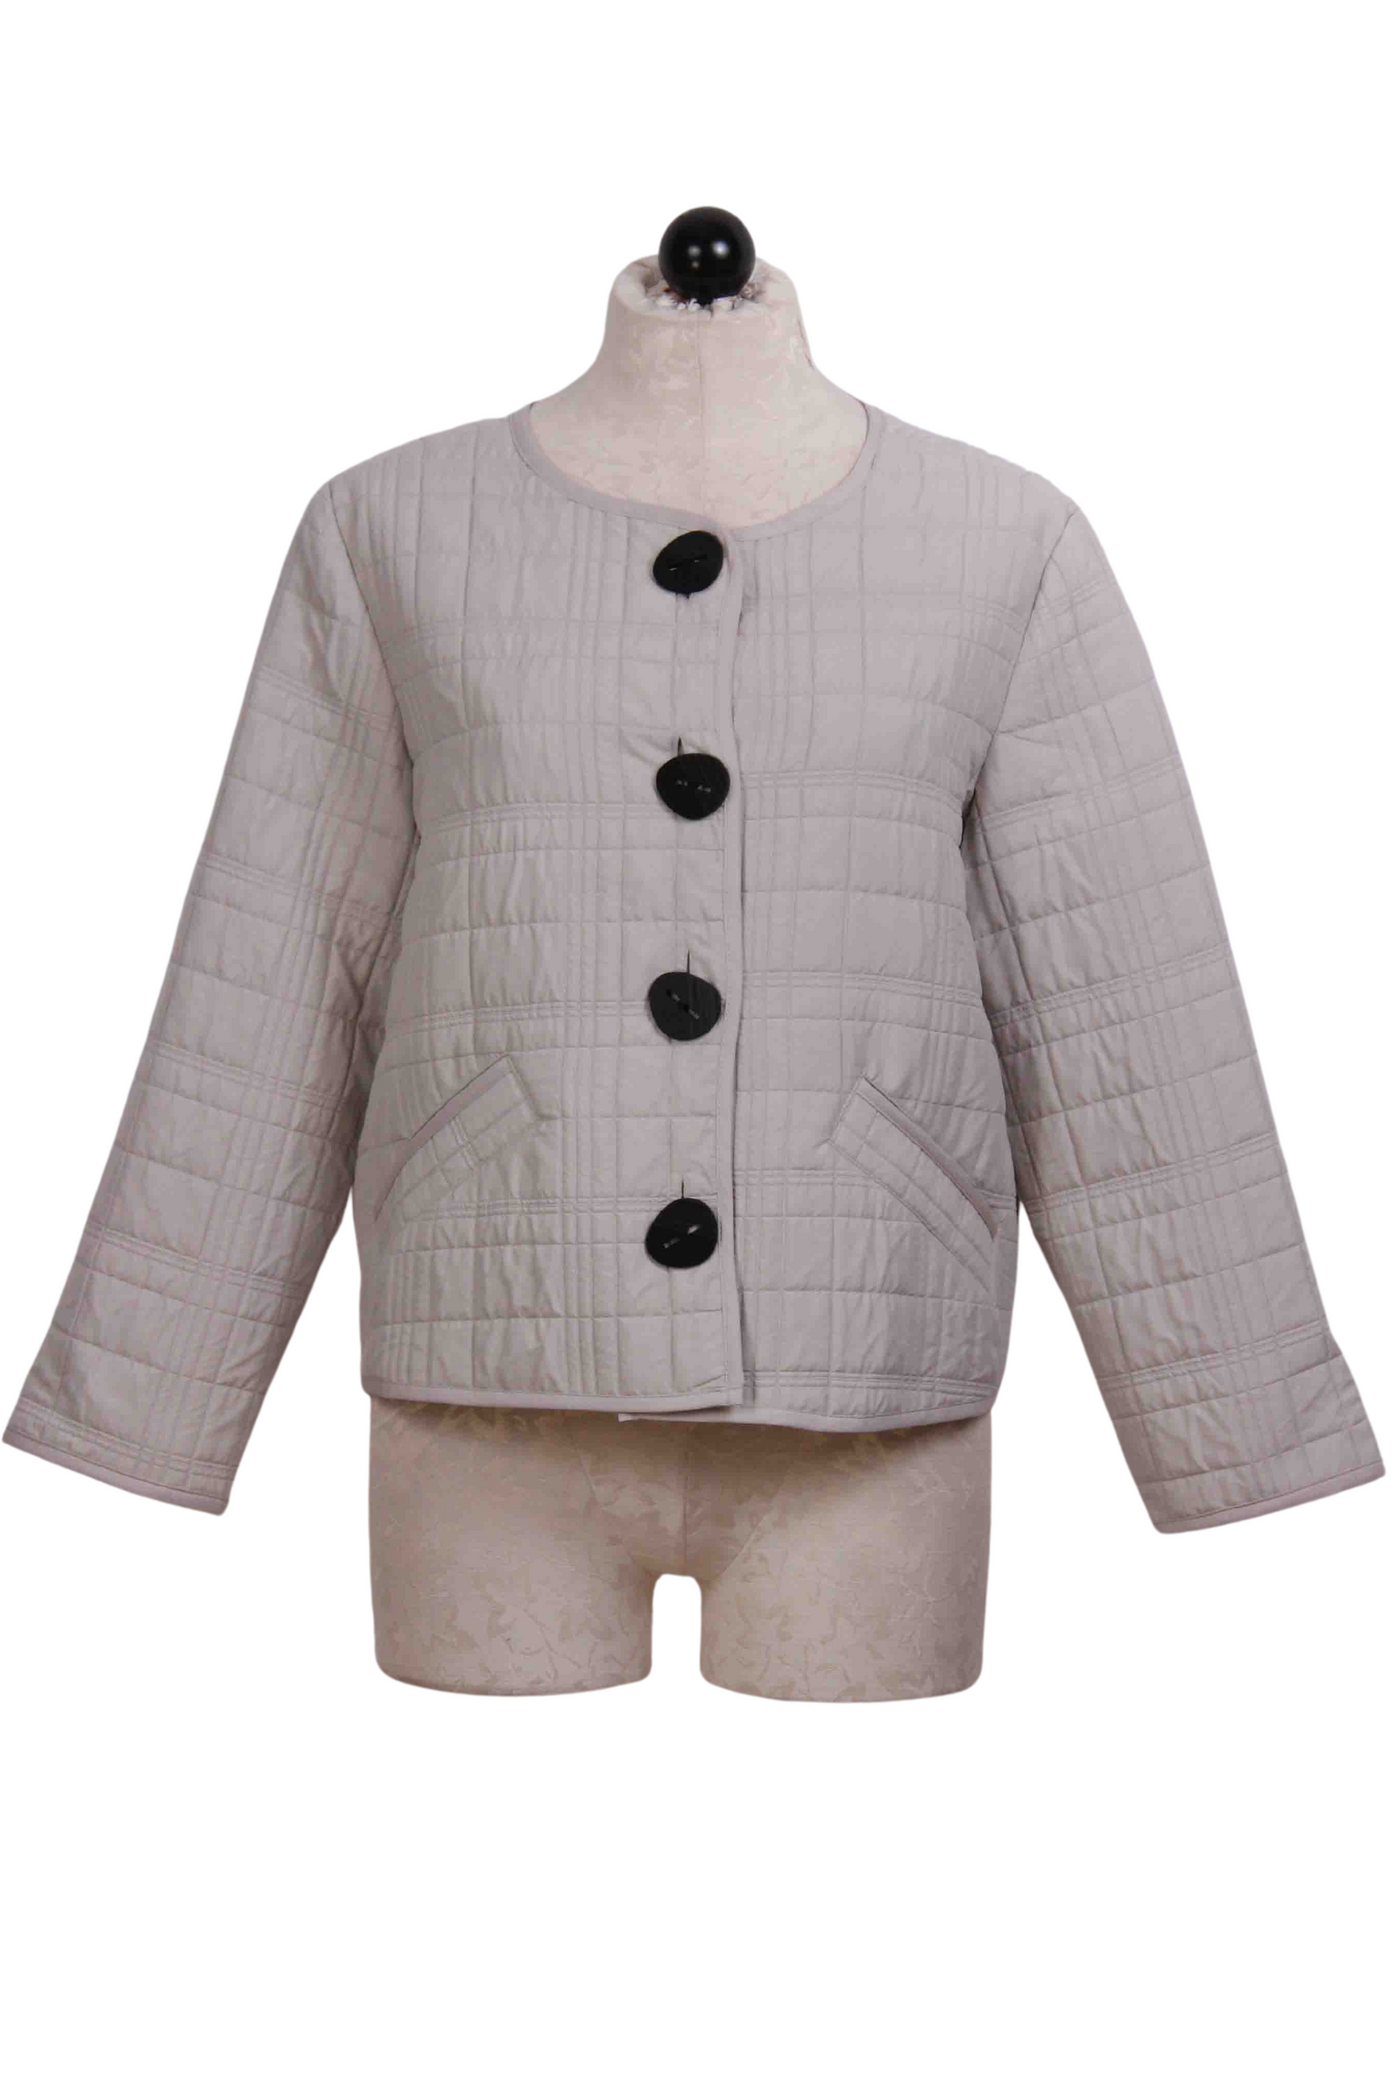 Sand colored Button Front Quilt Bomber Jacket by Liv by Habitat